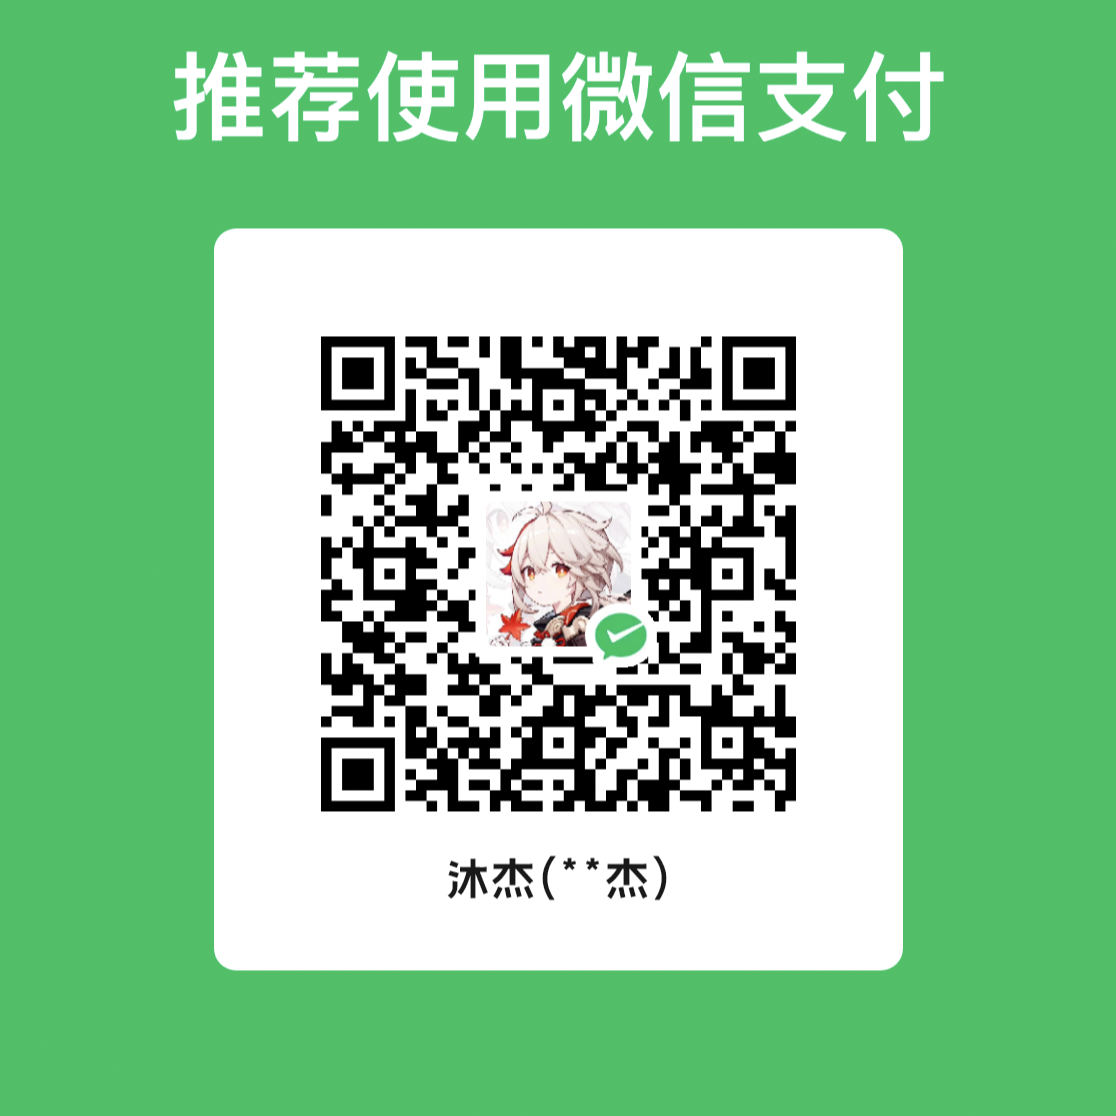 Payment Code